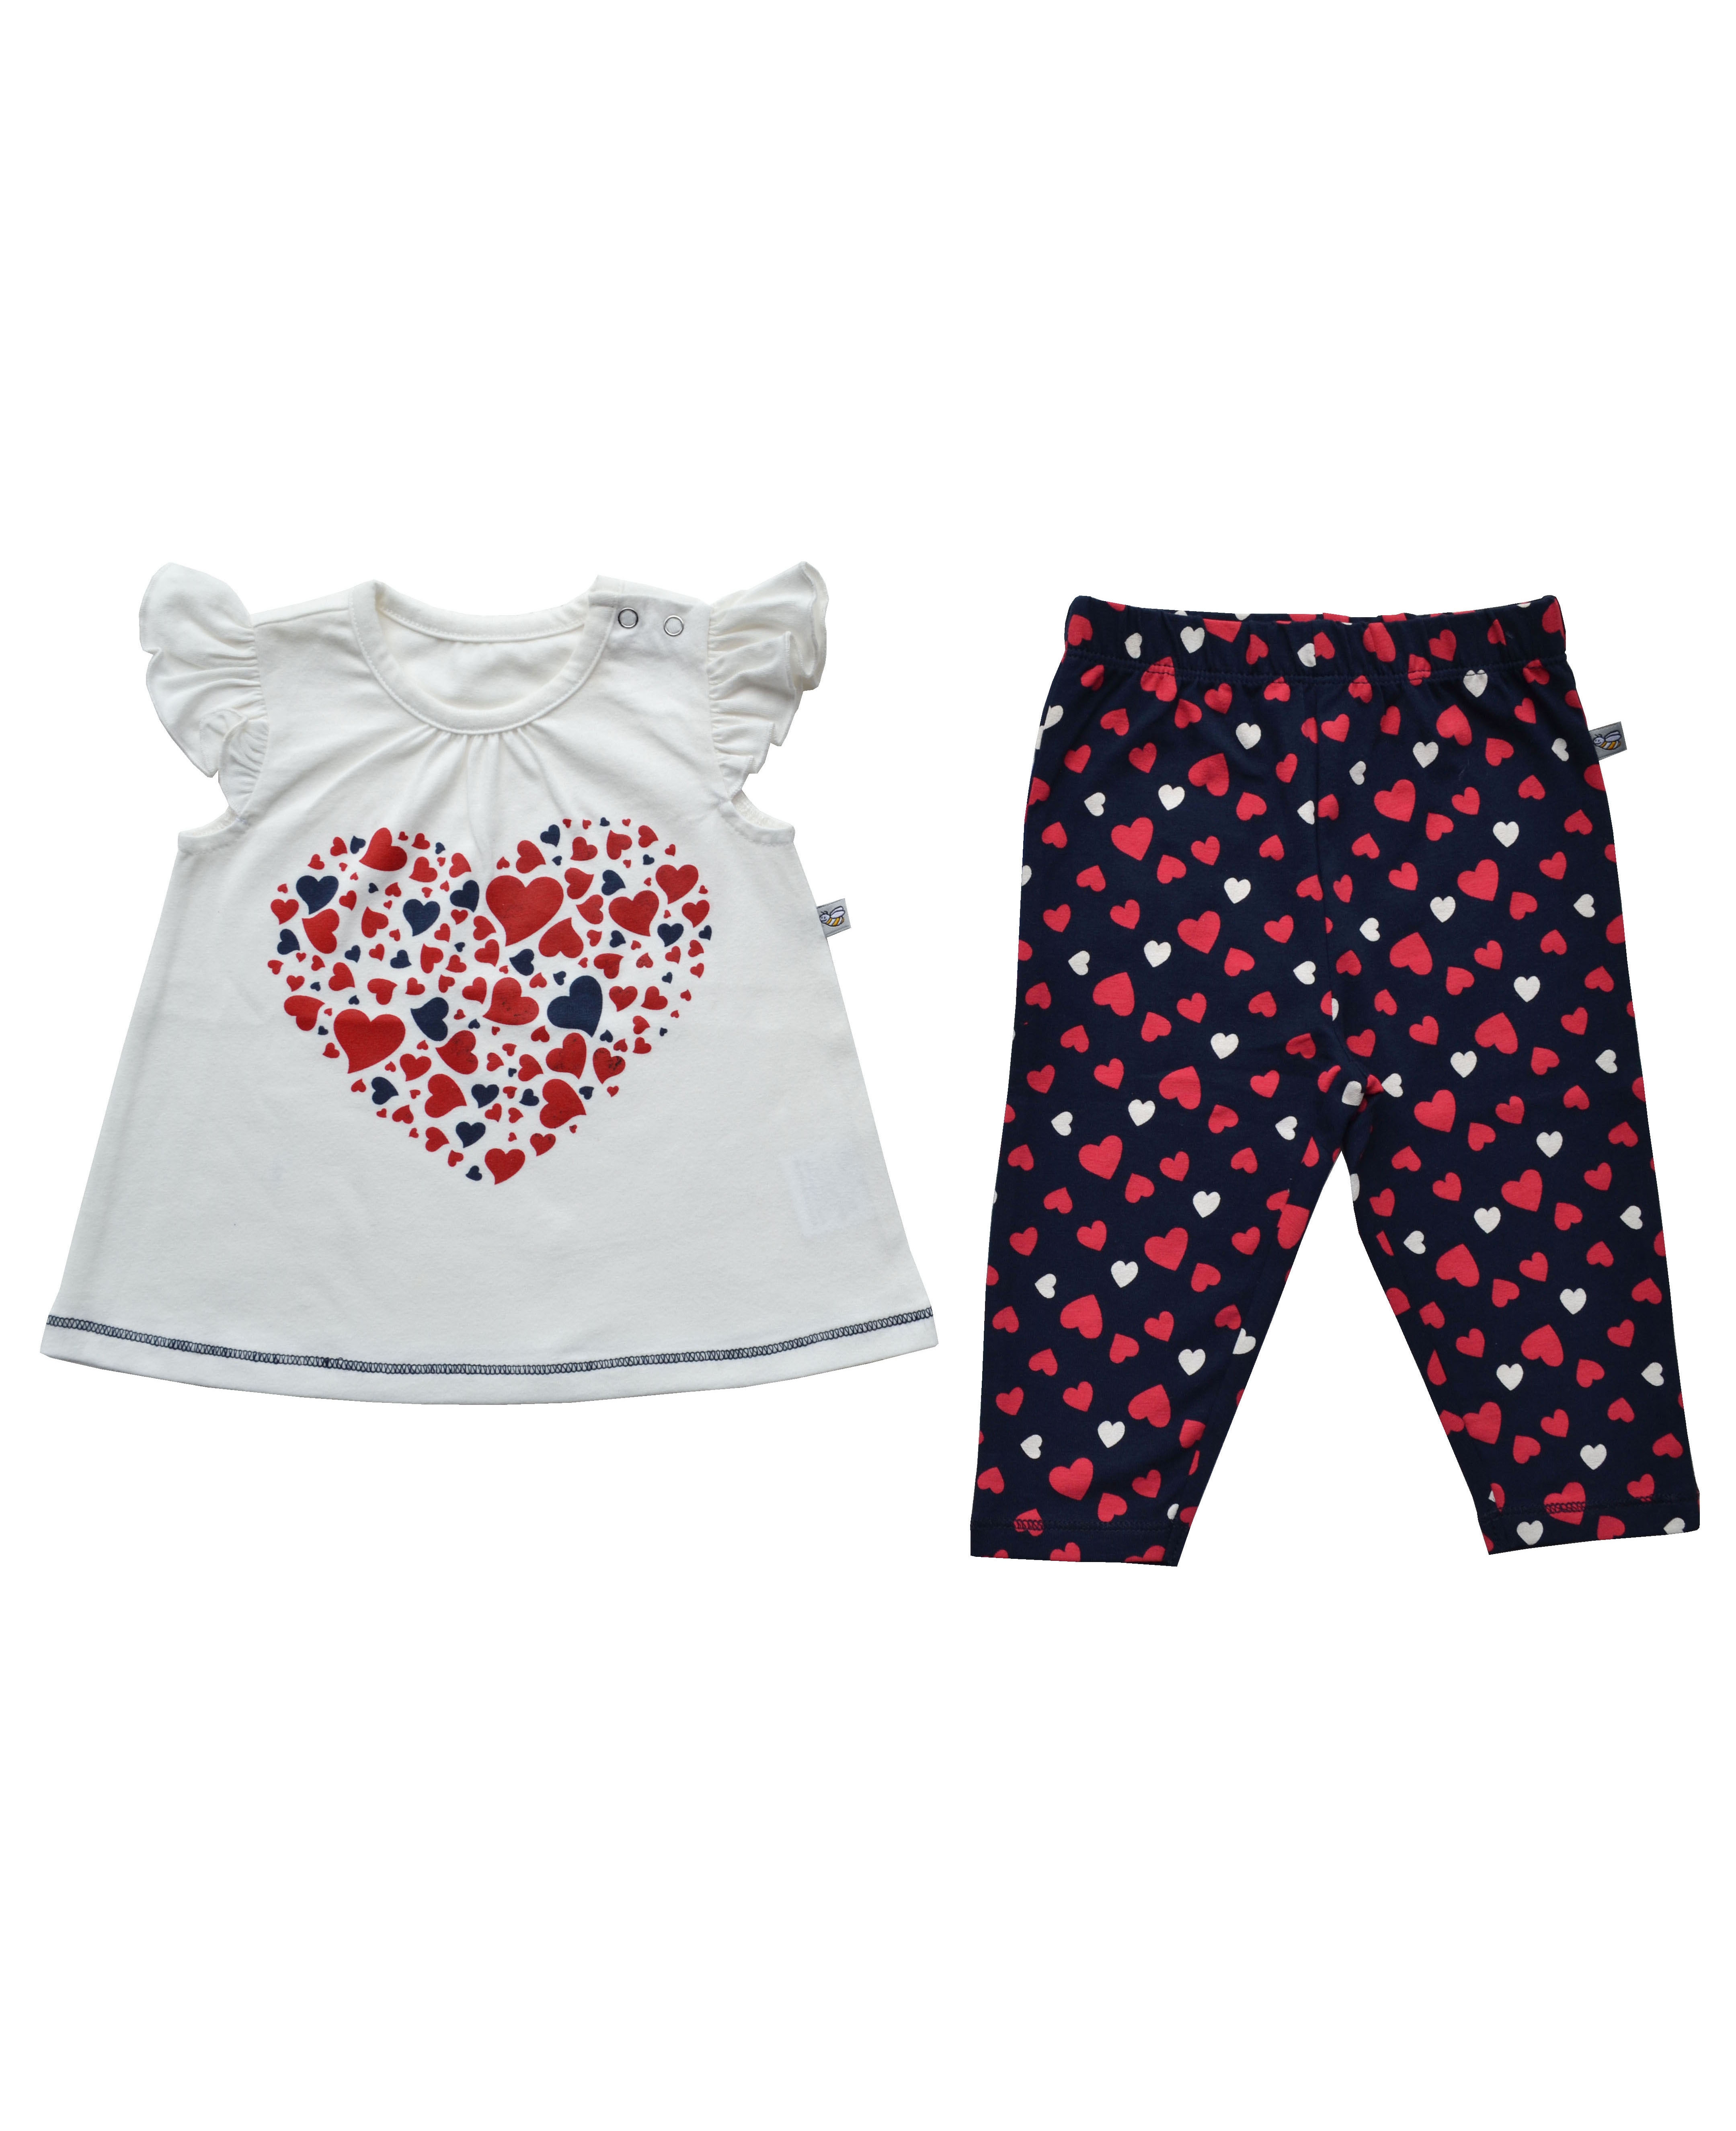 Babeez | Off White Heart Printed Top + Navy Allover Heart Printed Legging Set (95% Cotton 5% Elasthan) undefined